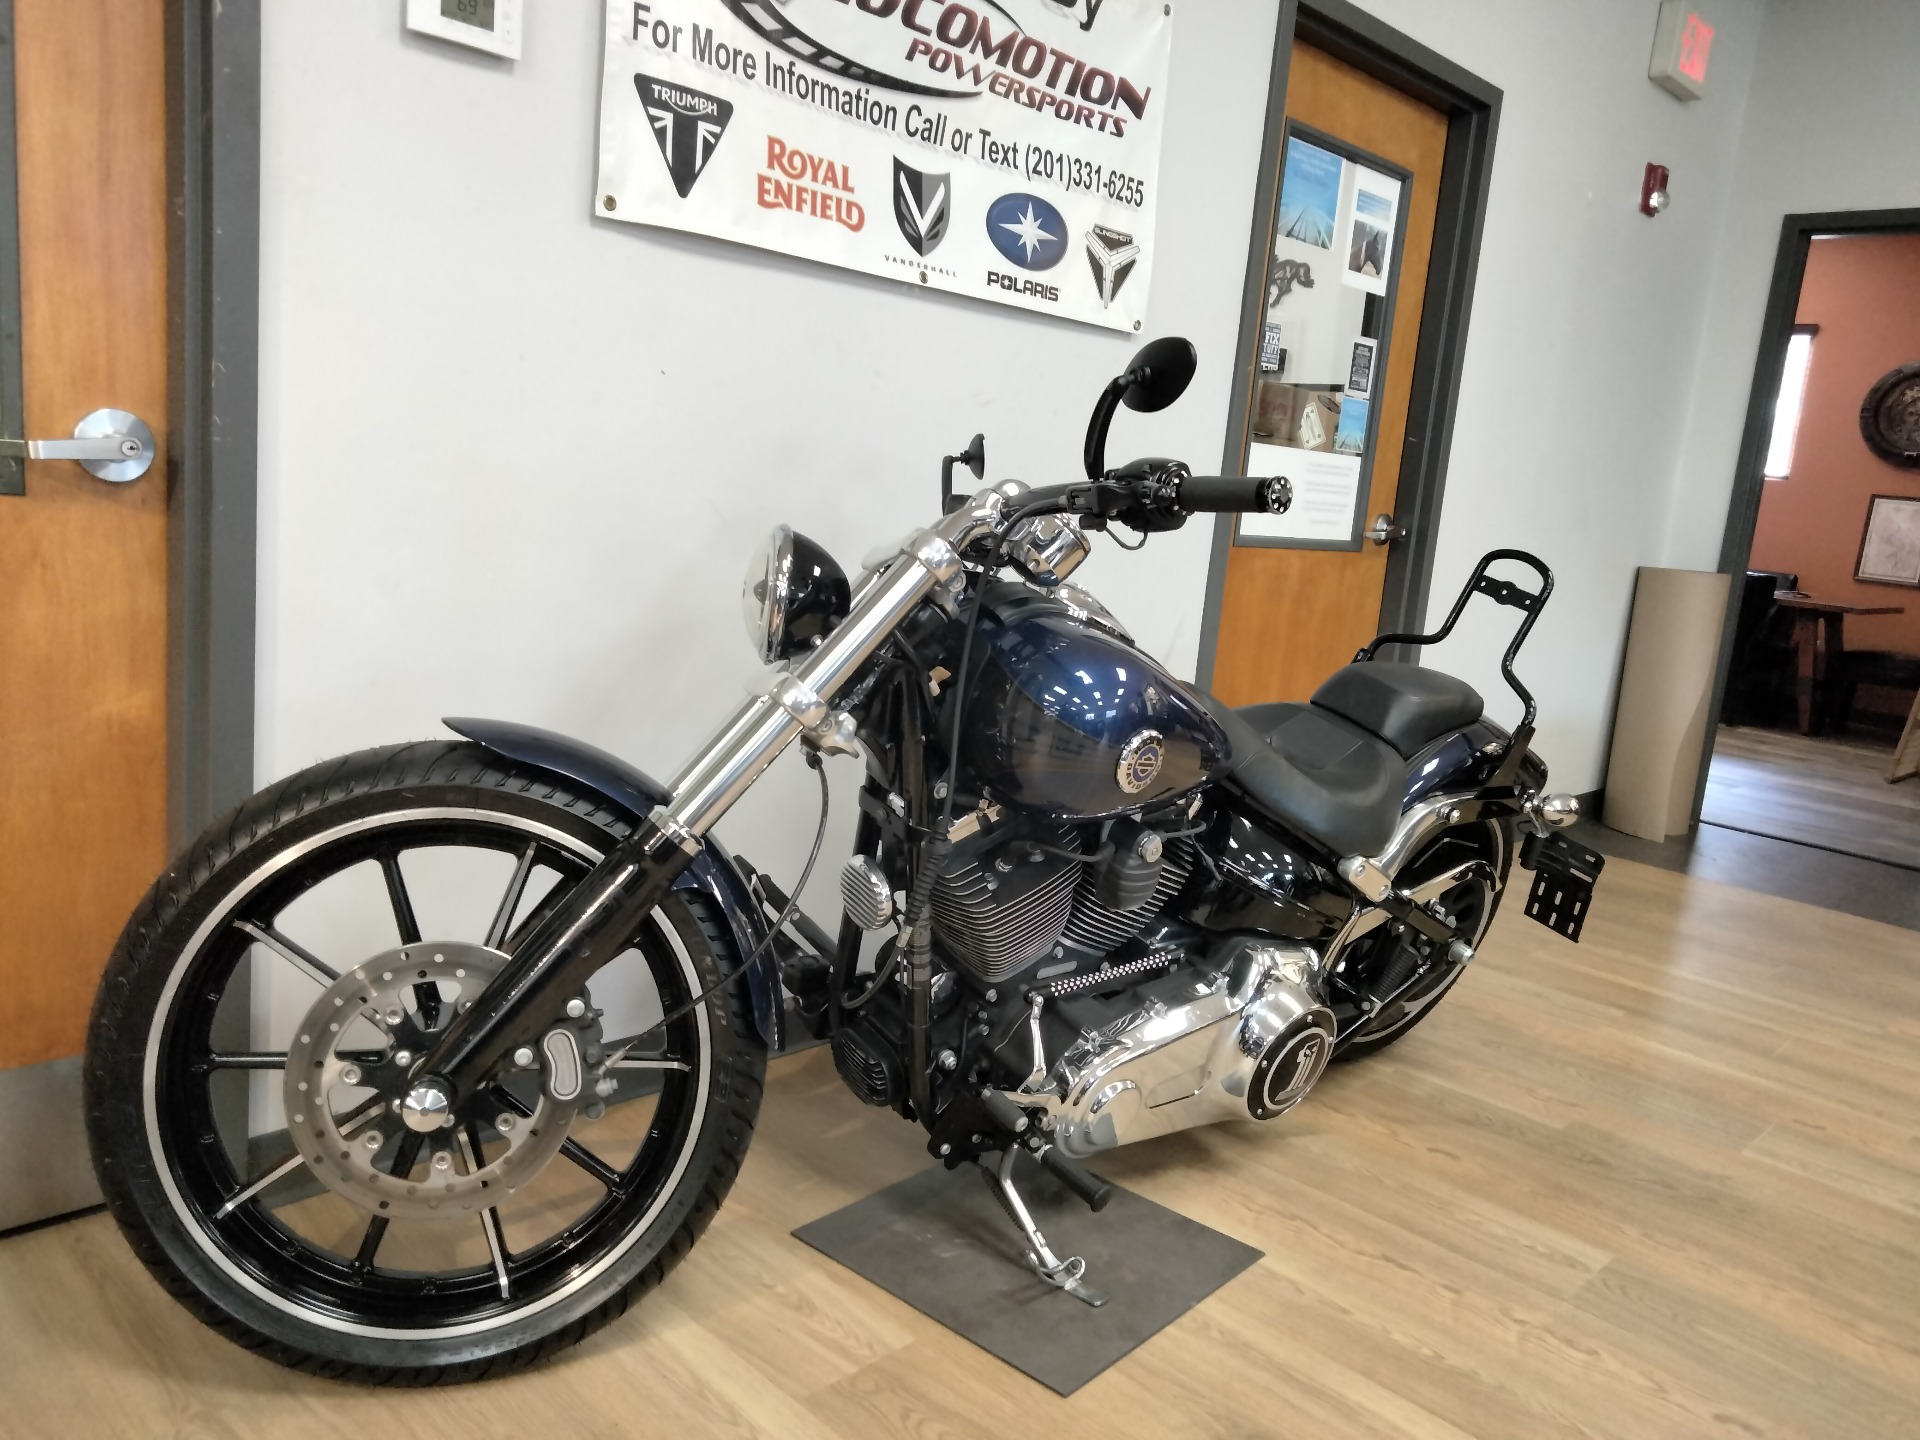 2013 Harley-Davidson Softail® Breakout® in Mahwah, New Jersey - Photo 24